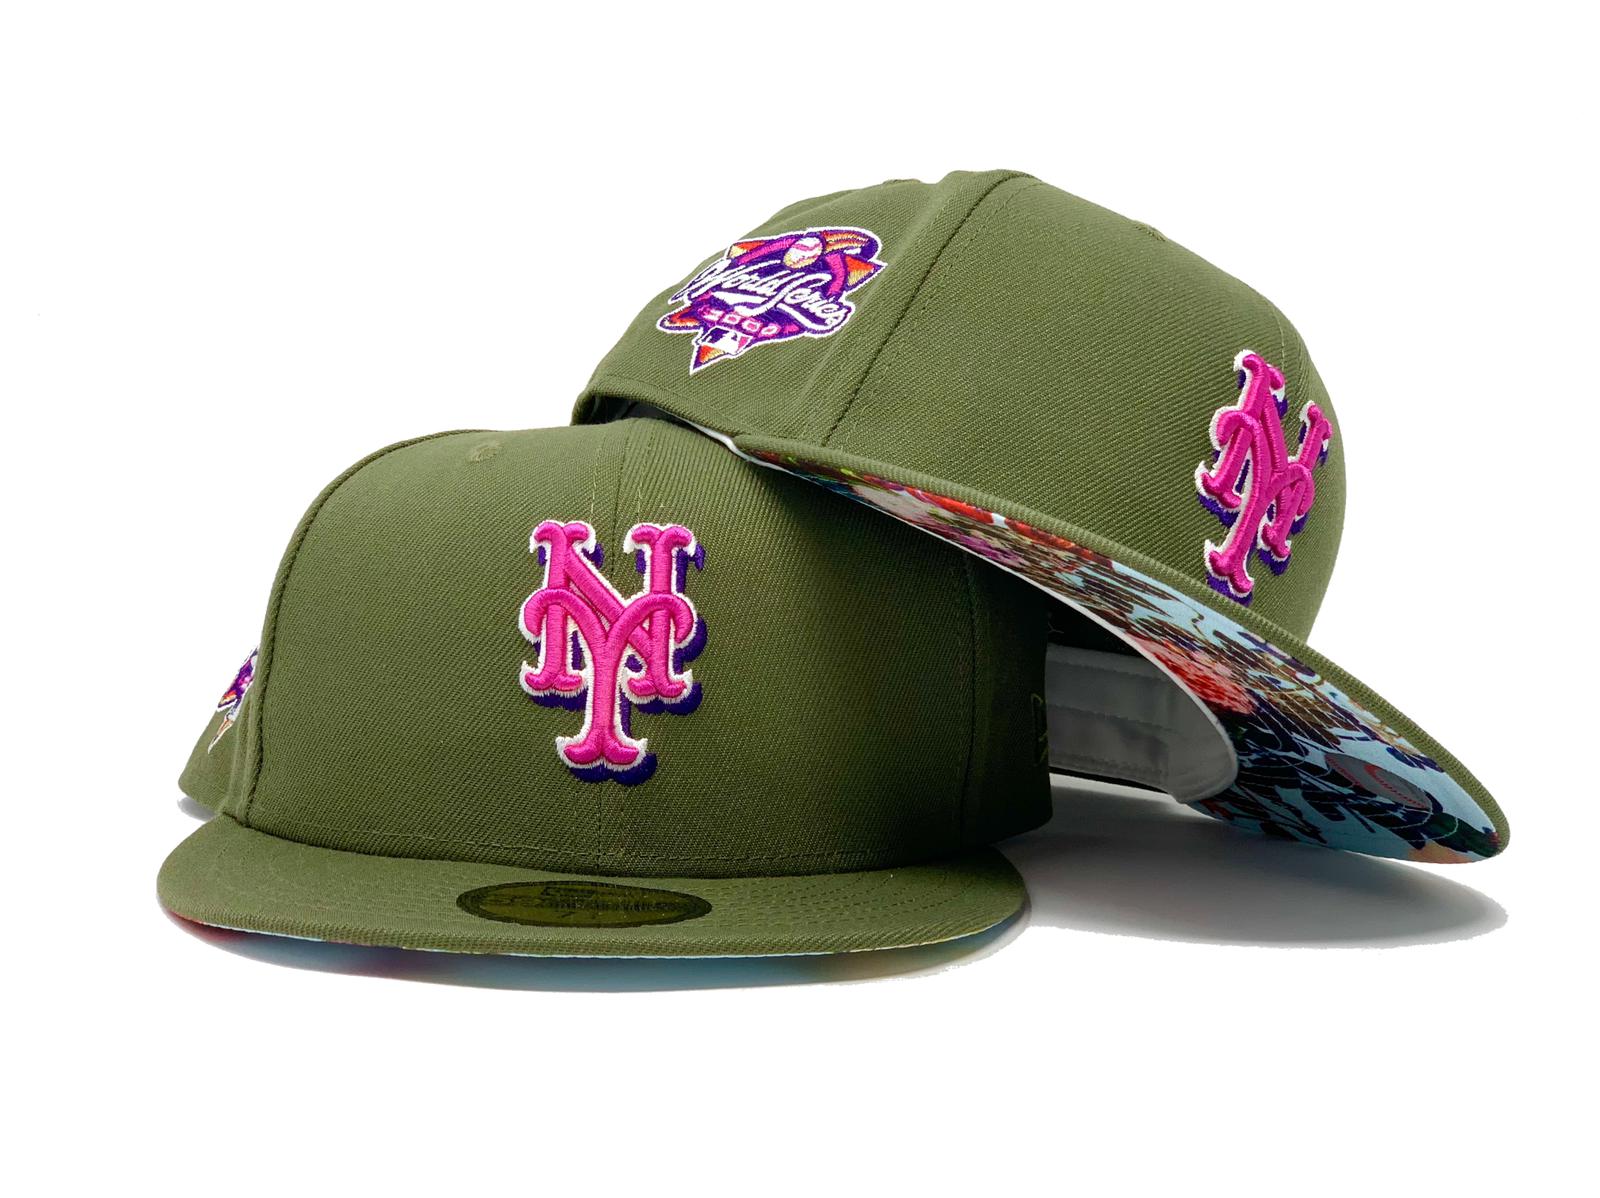 New York Mets Hat With Customized Brimmtrimm Hat Accessory 